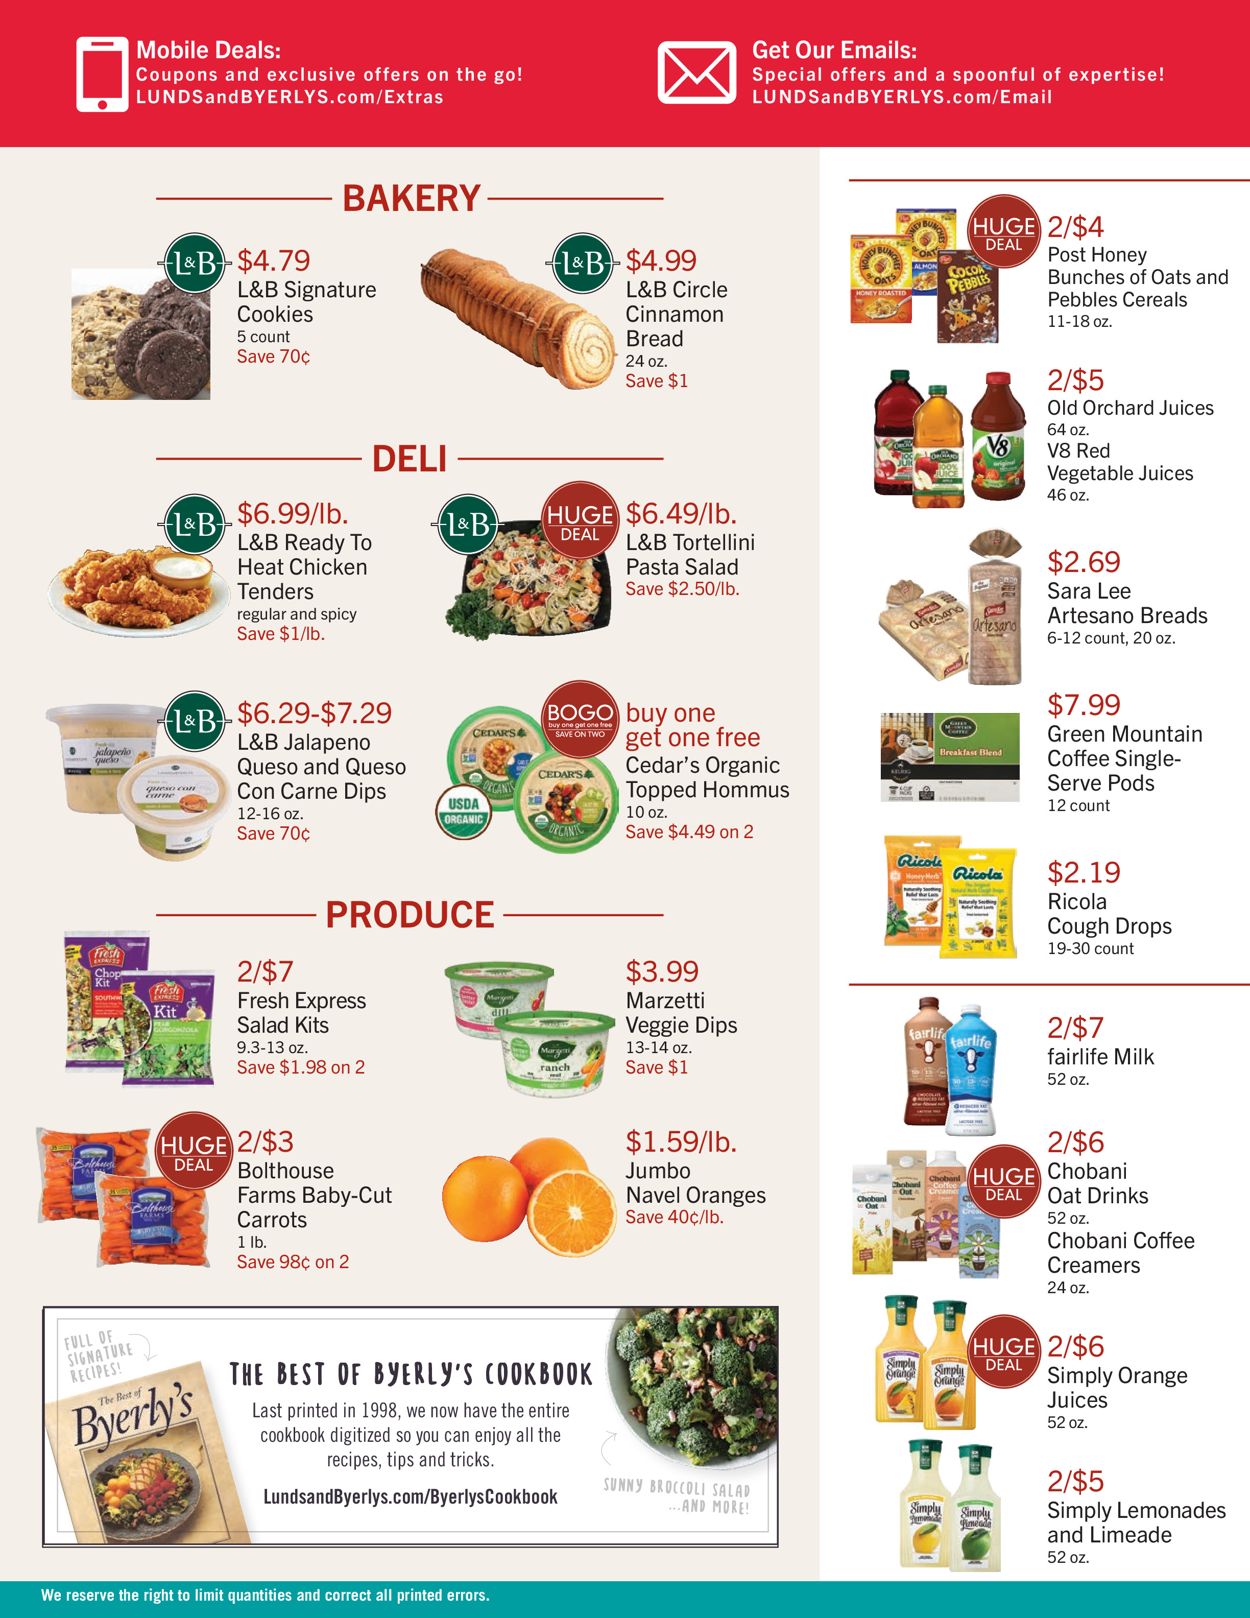 Catalogue Lunds & Byerlys from 12/26/2020